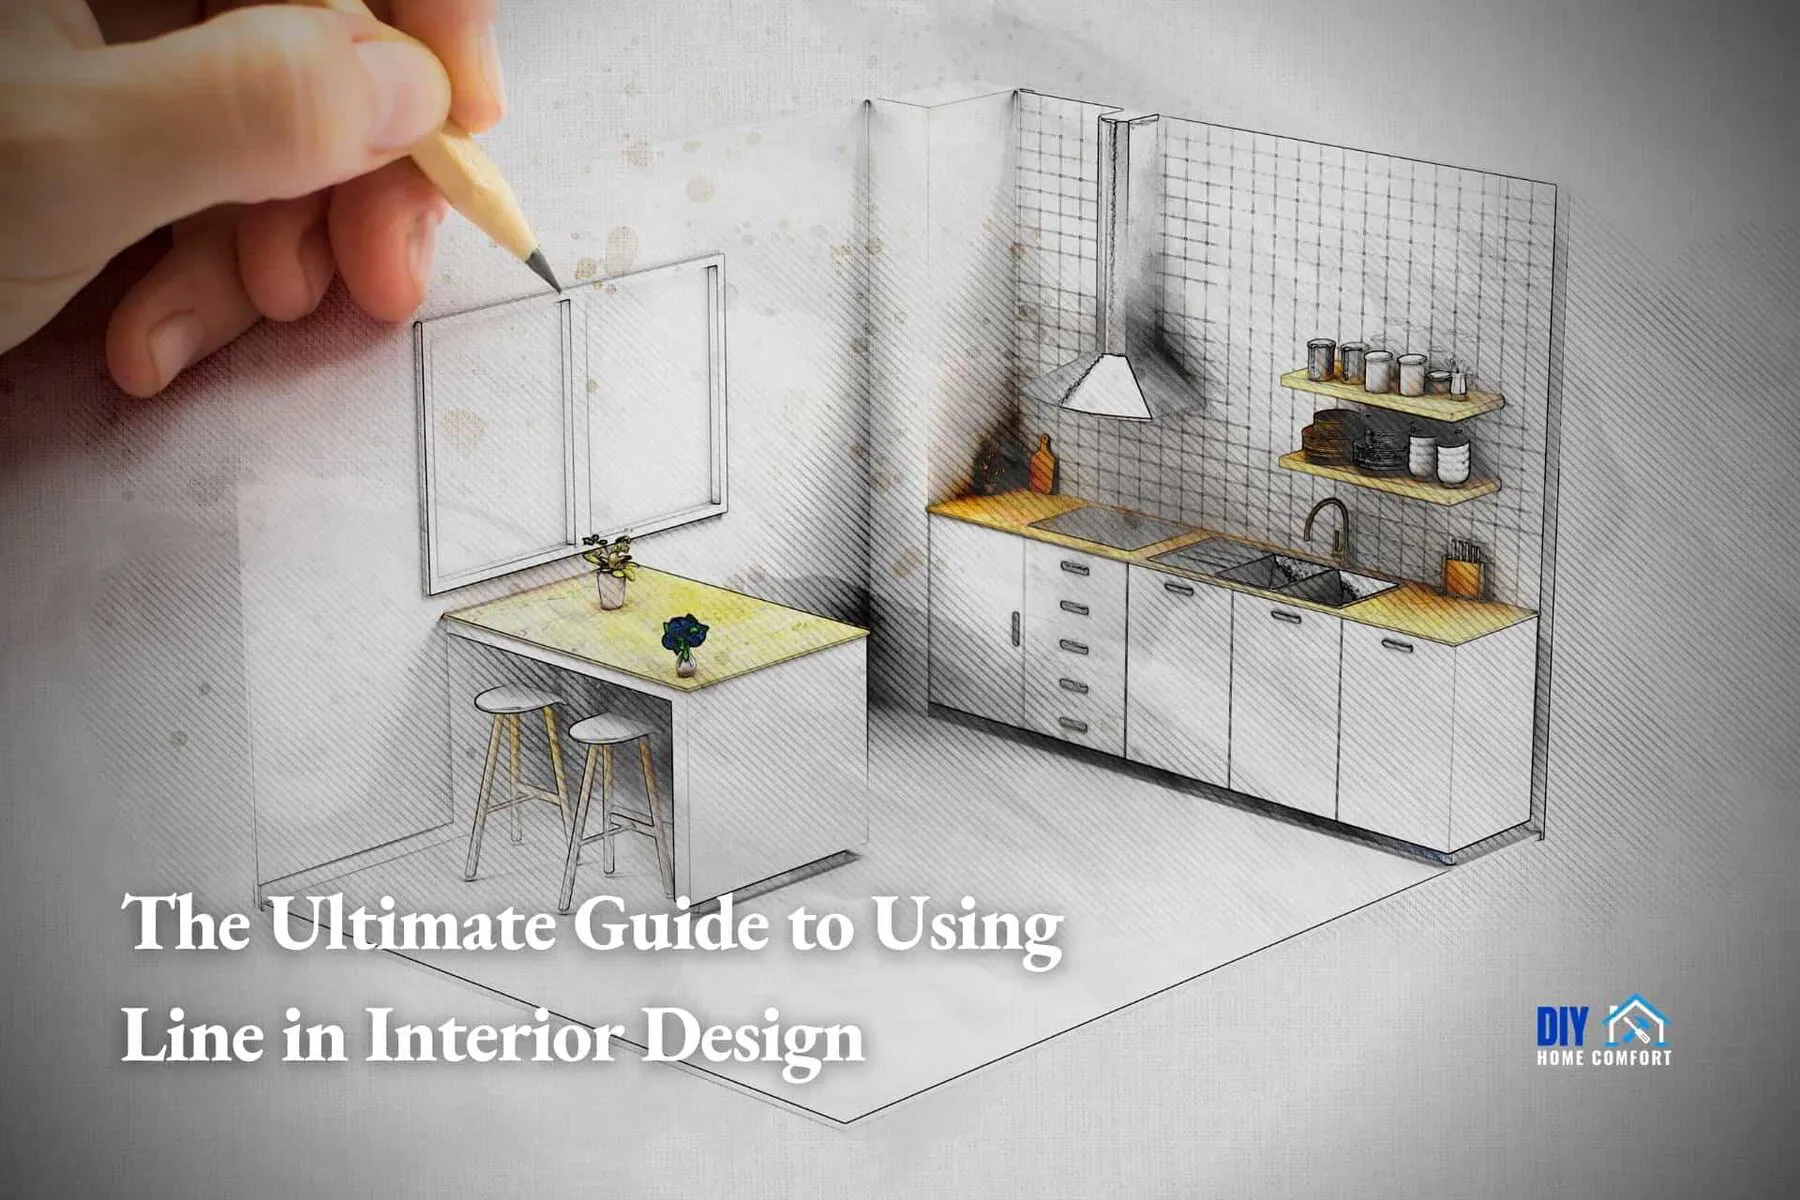 The Ultimate Guide to Using Line in Interior Design